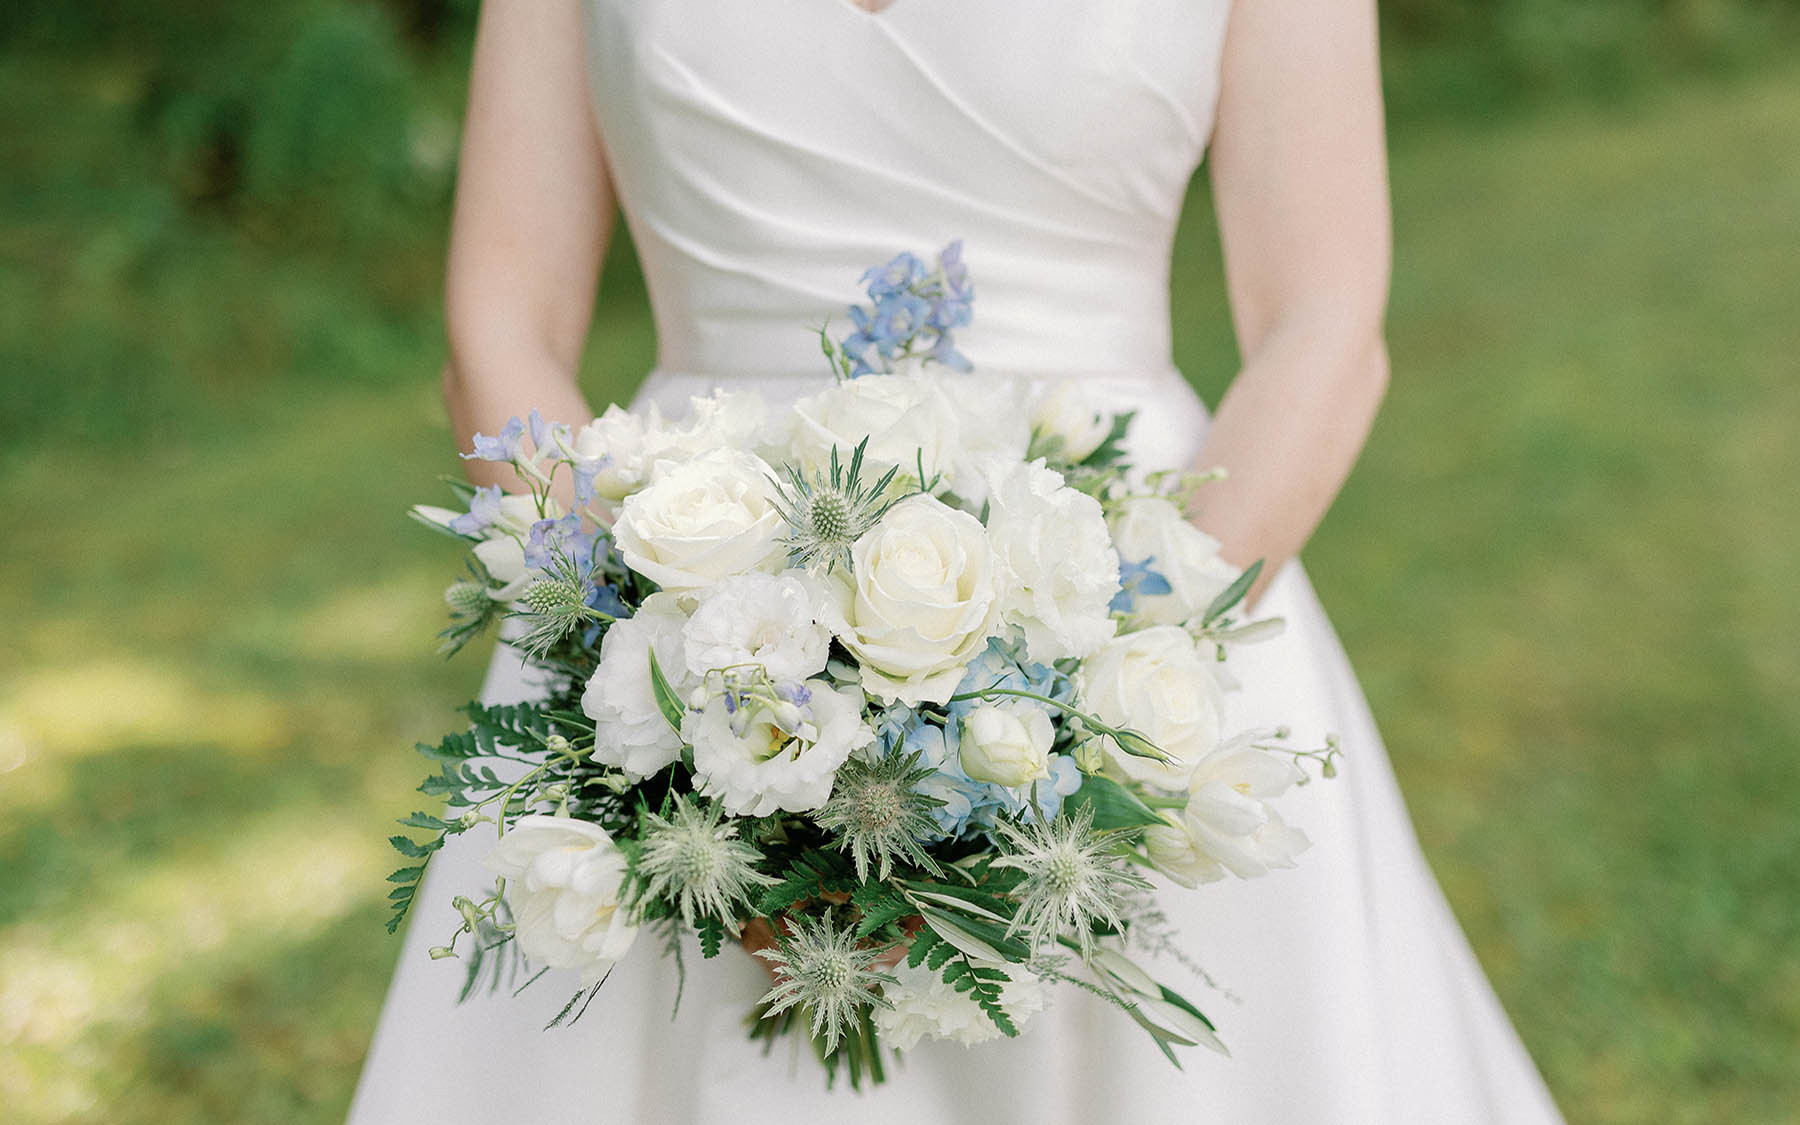 bride in white dress holding bouquet of white, blue and green flowers.